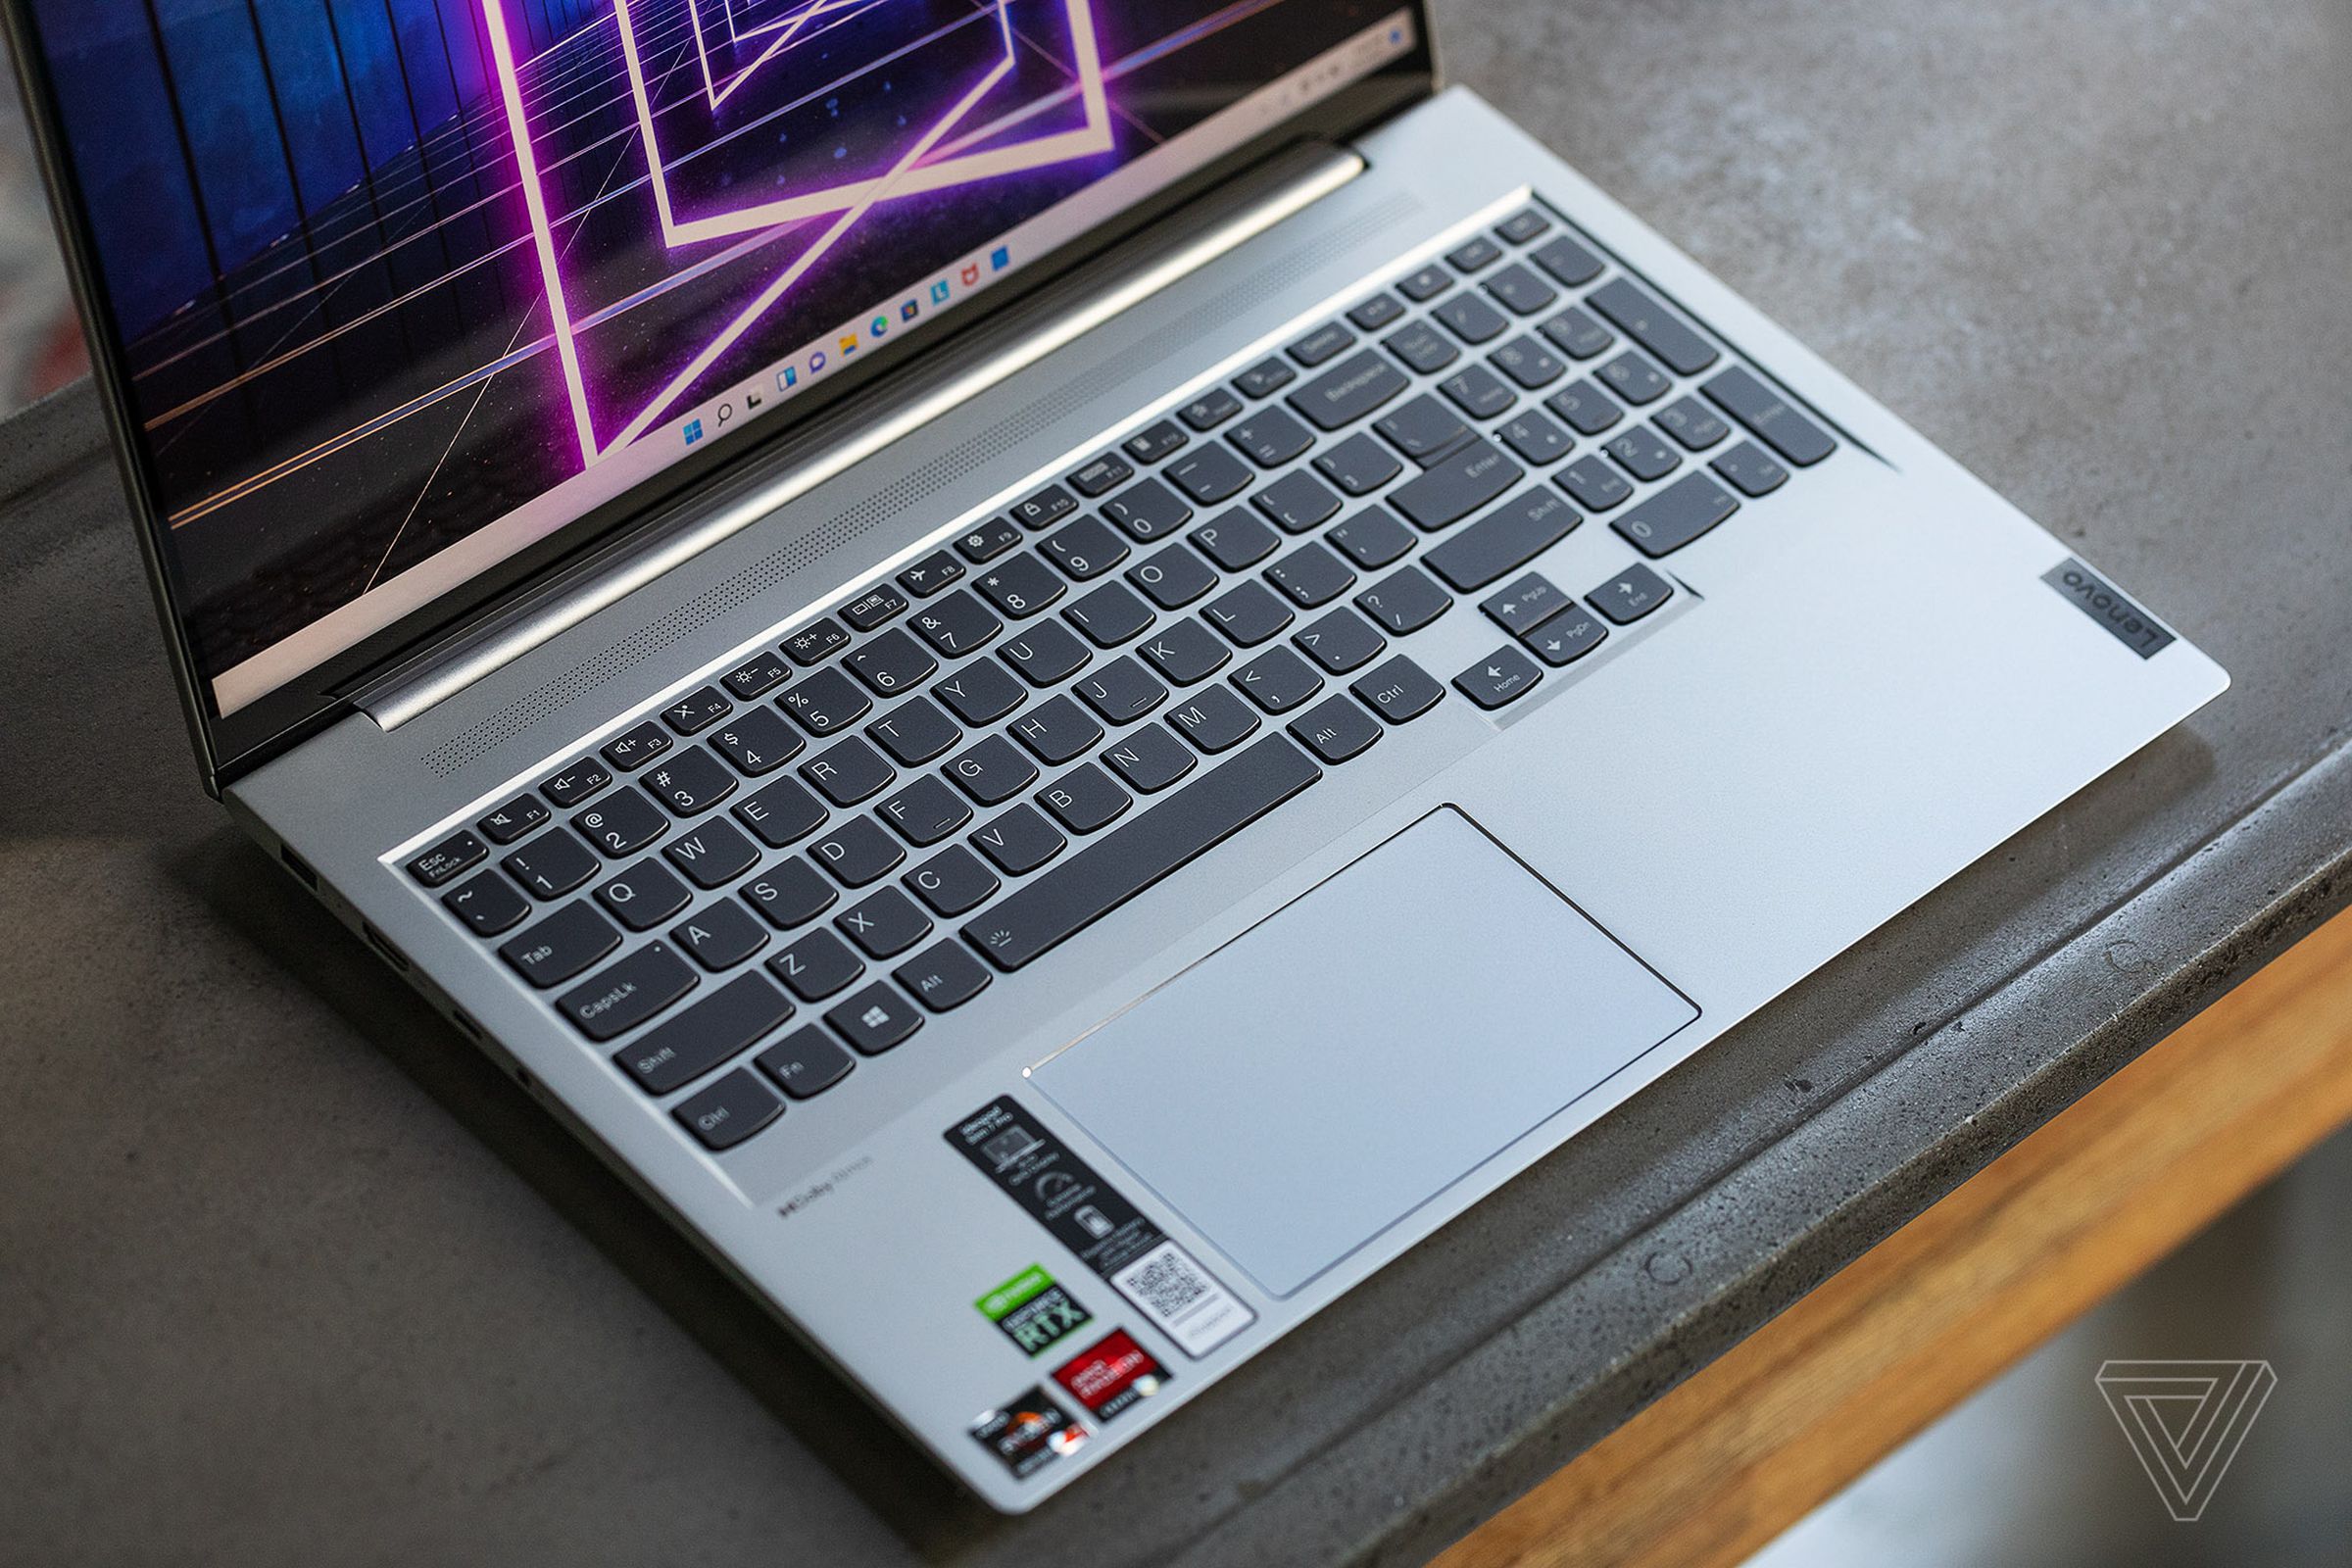 Lenovo fit a spacious keyboard and a full numpad in the IdeaPad Slim 7 Pro’s deck.